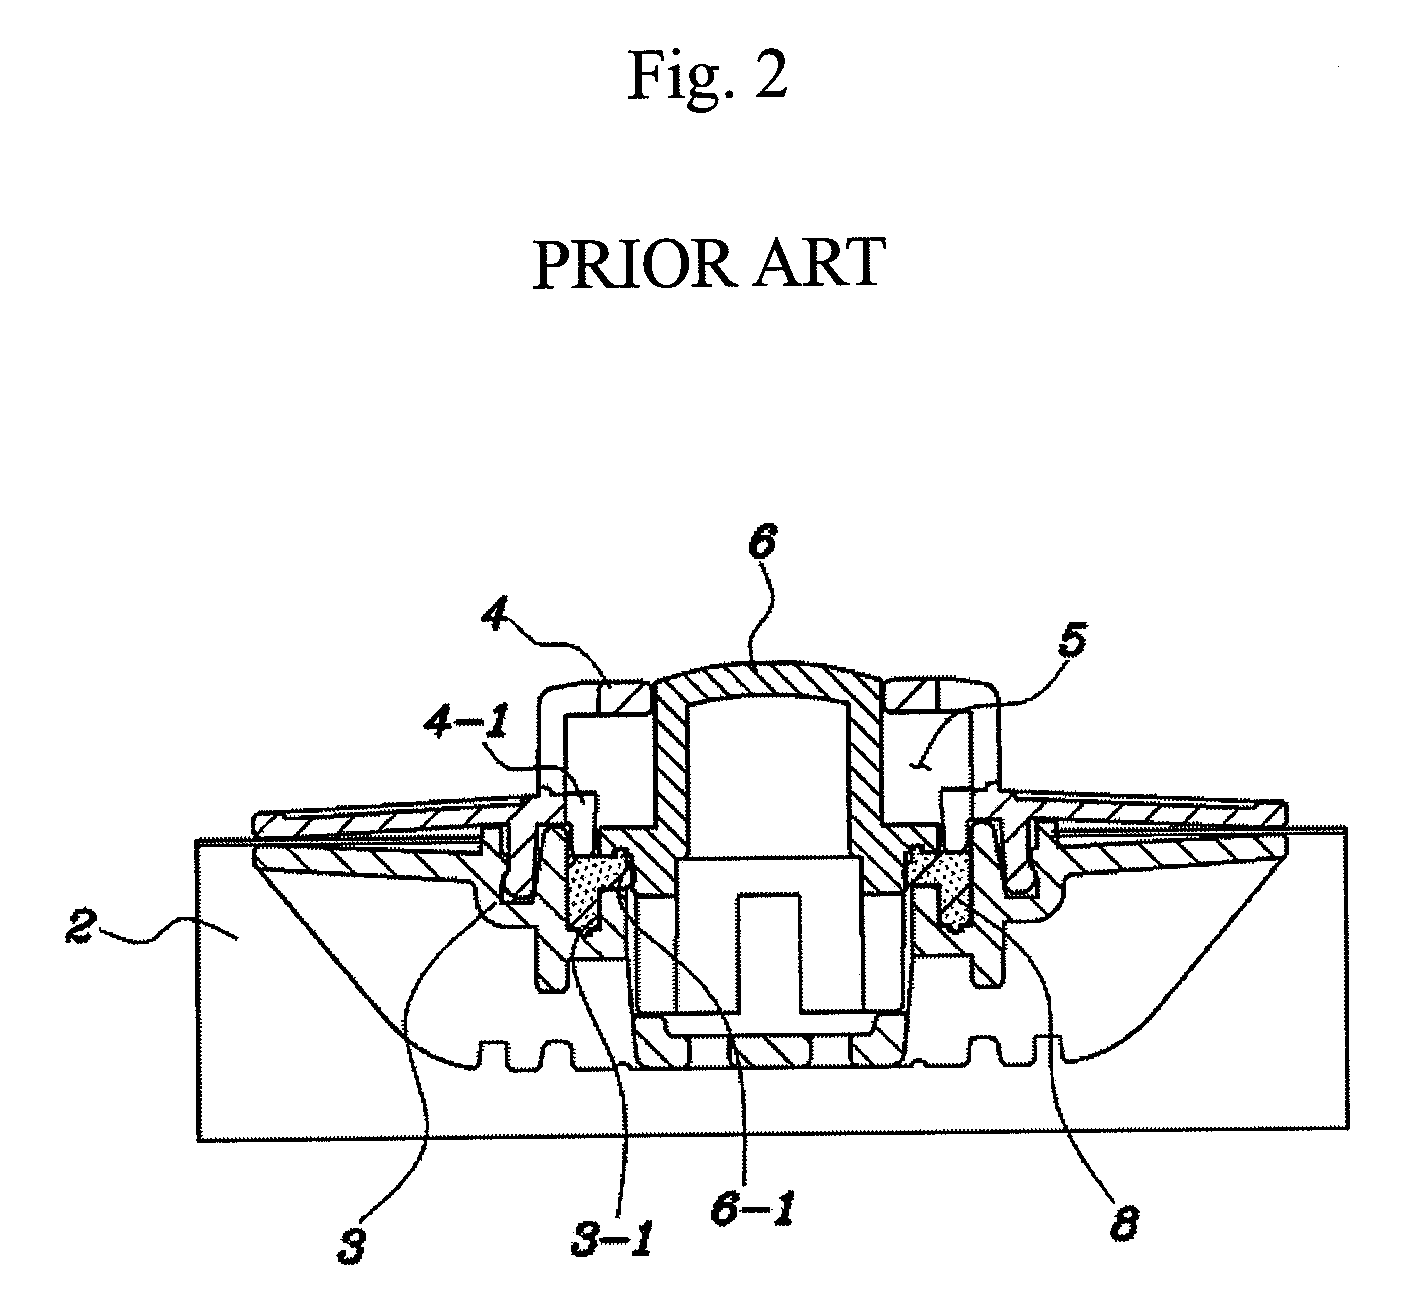 Air discharge valve for a bedclothes compressing-and-storing bag